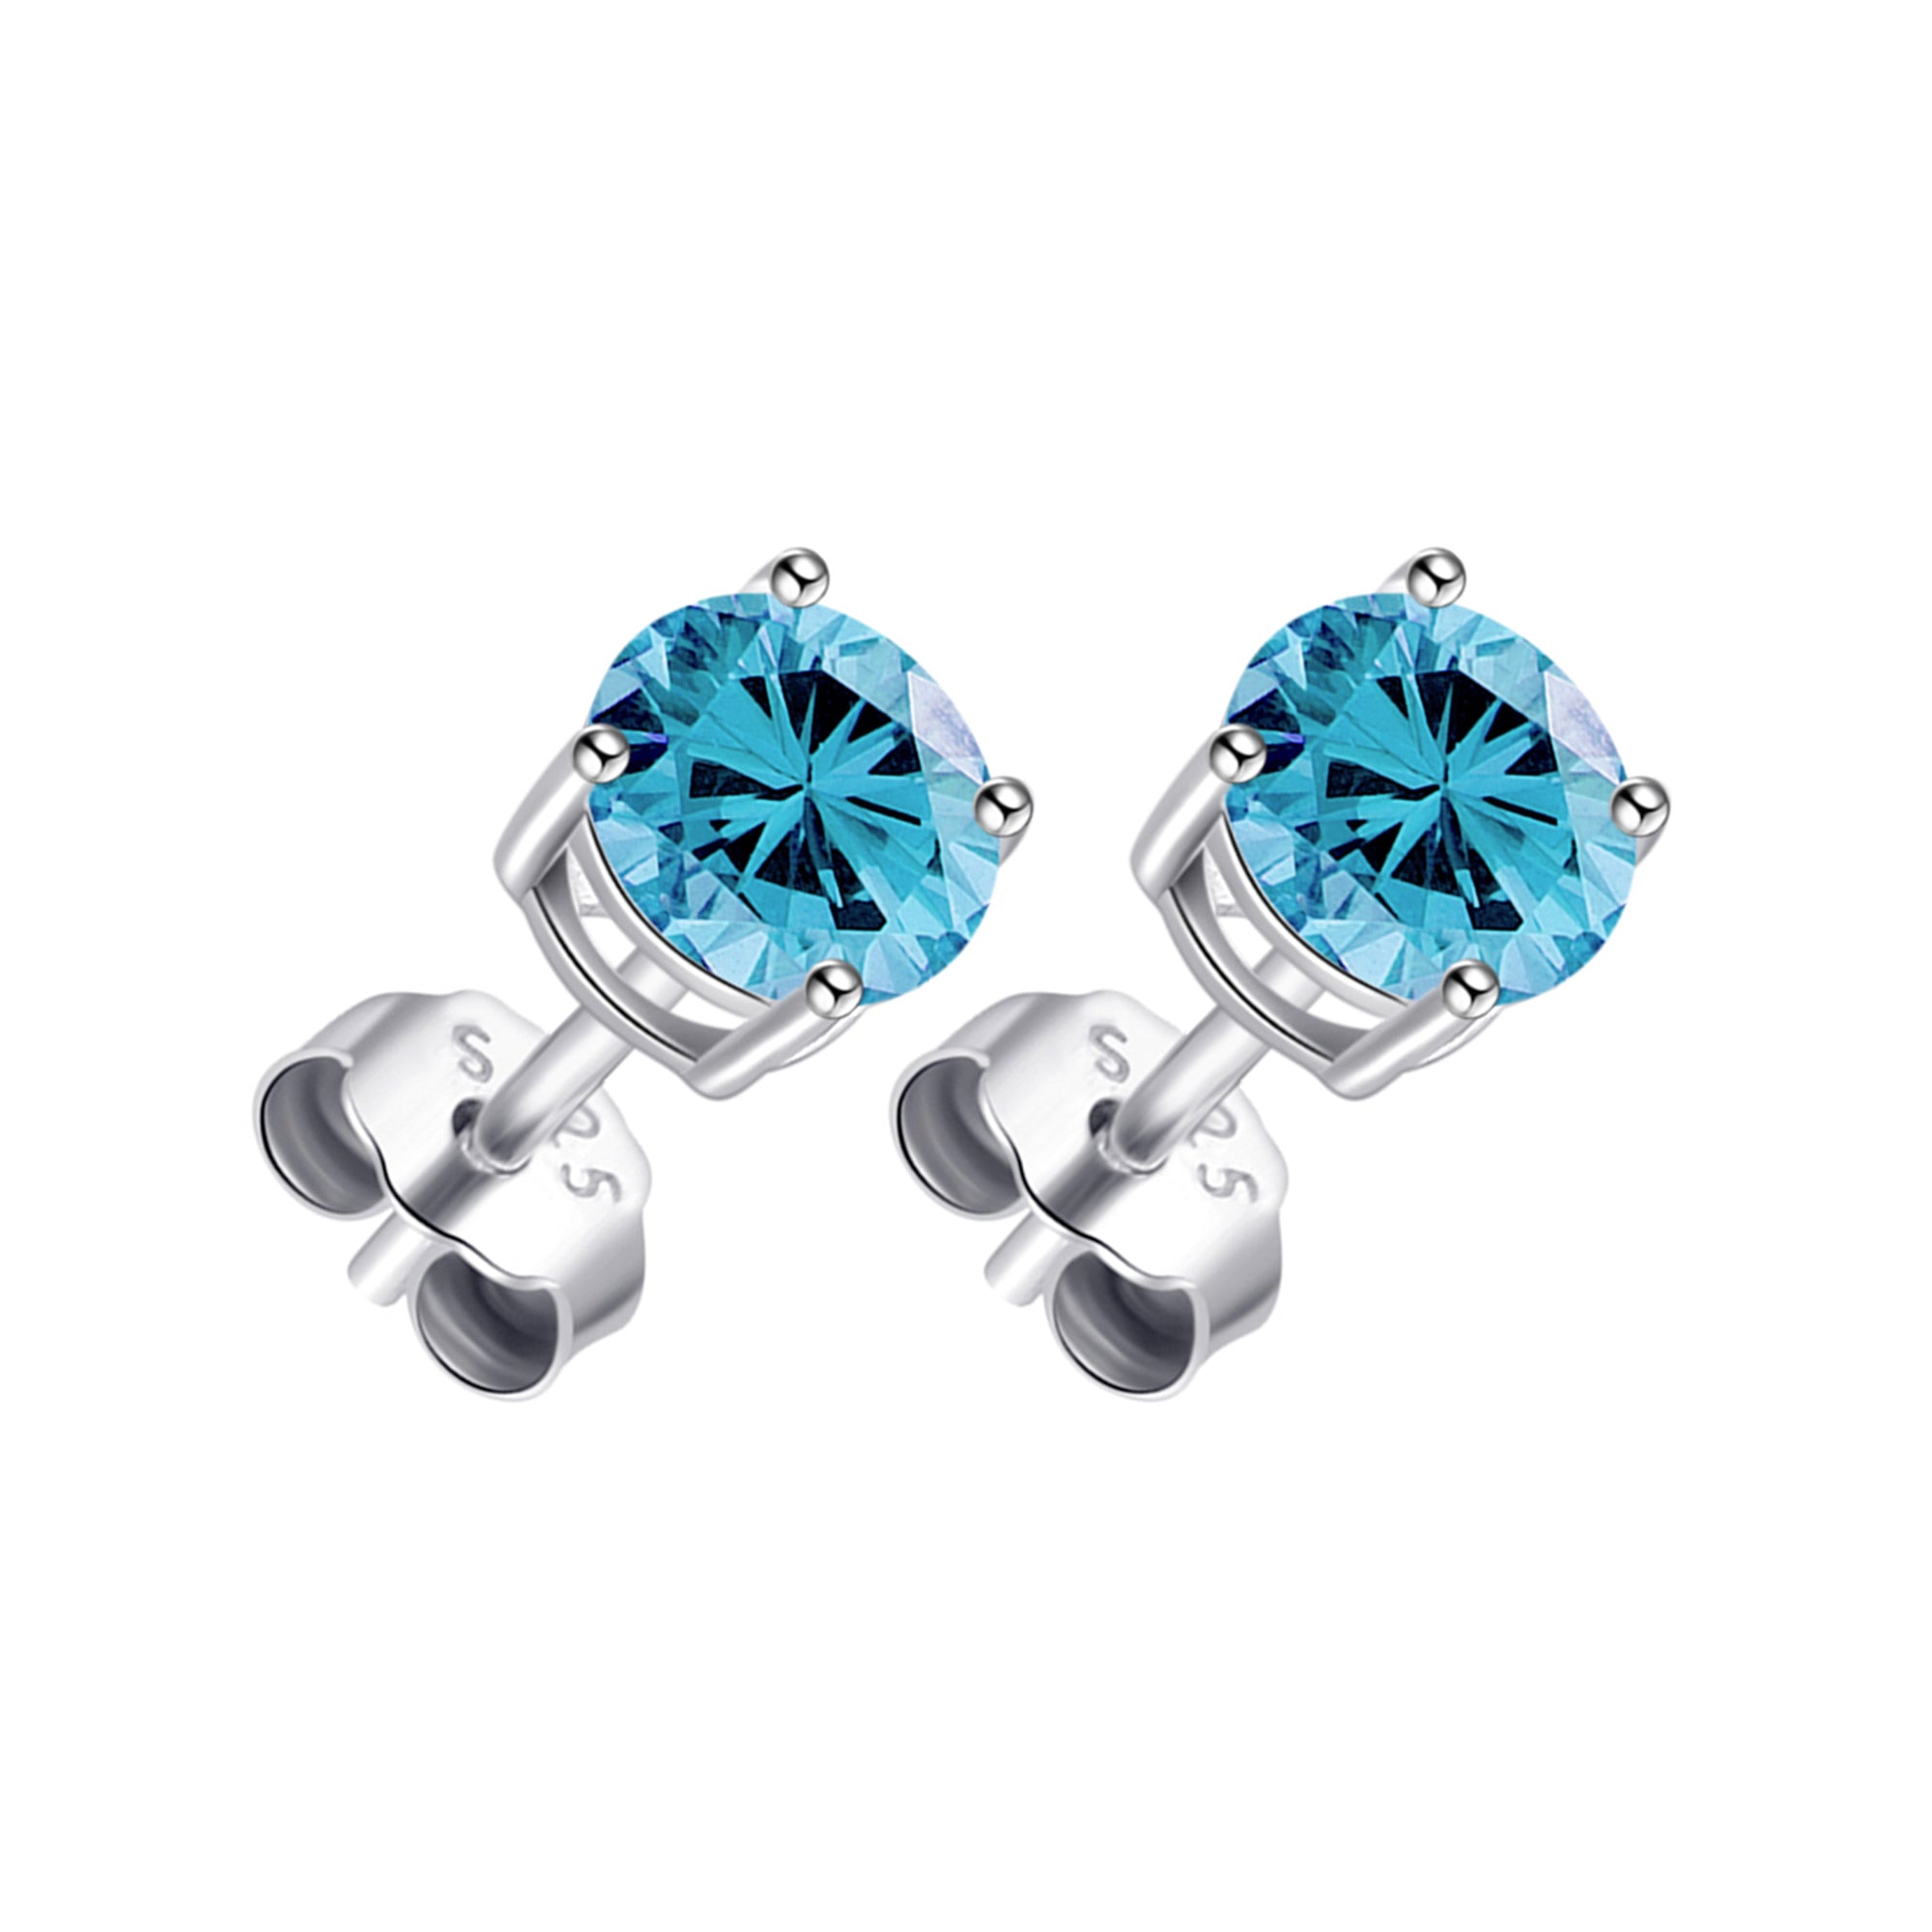 Sterling Silver Light Blue Earrings Created with Zircondia® Crystals by Philip Jones Jewellery